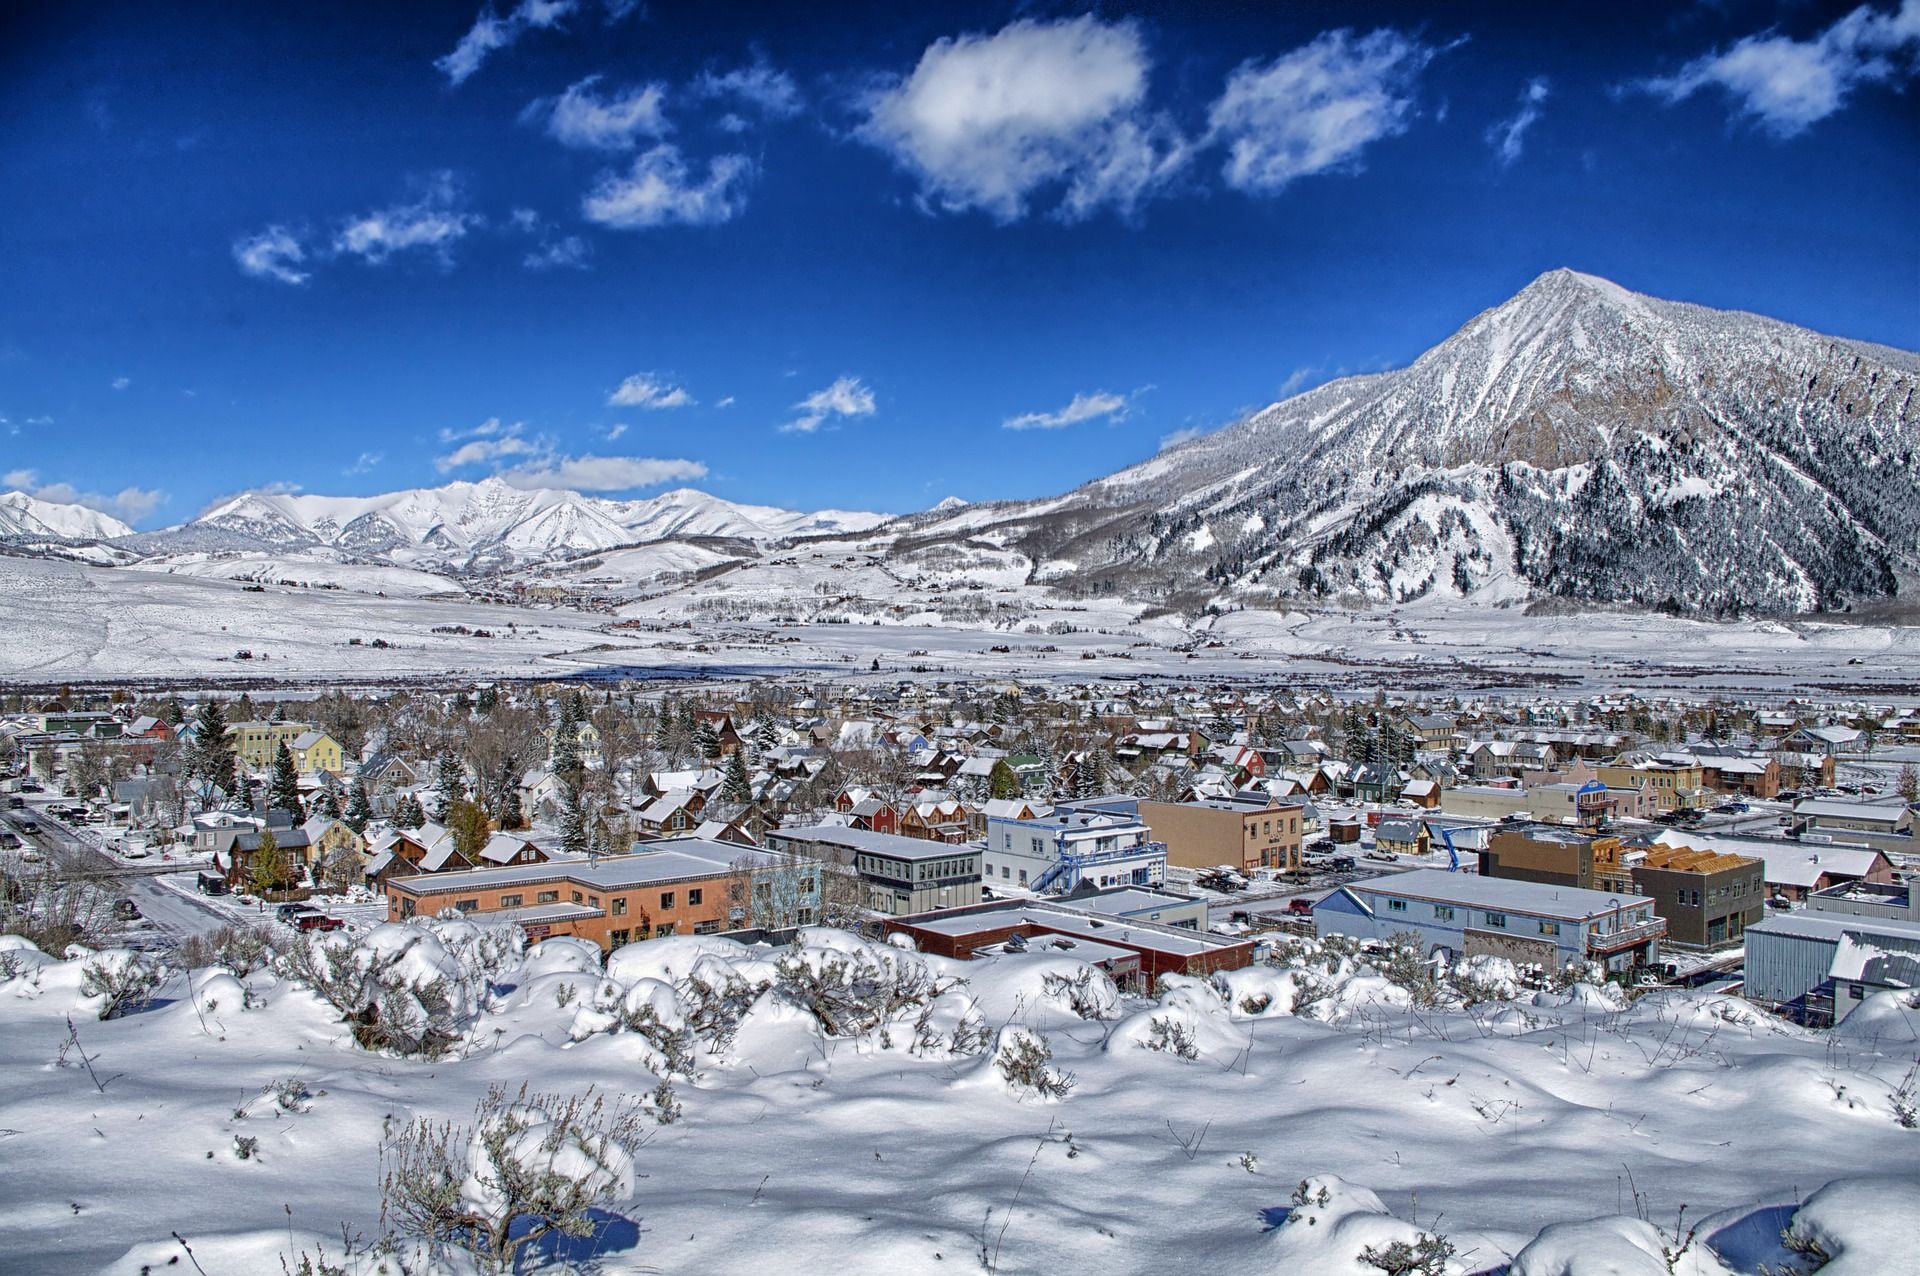 A view of Crested Butte, Colorado in winter